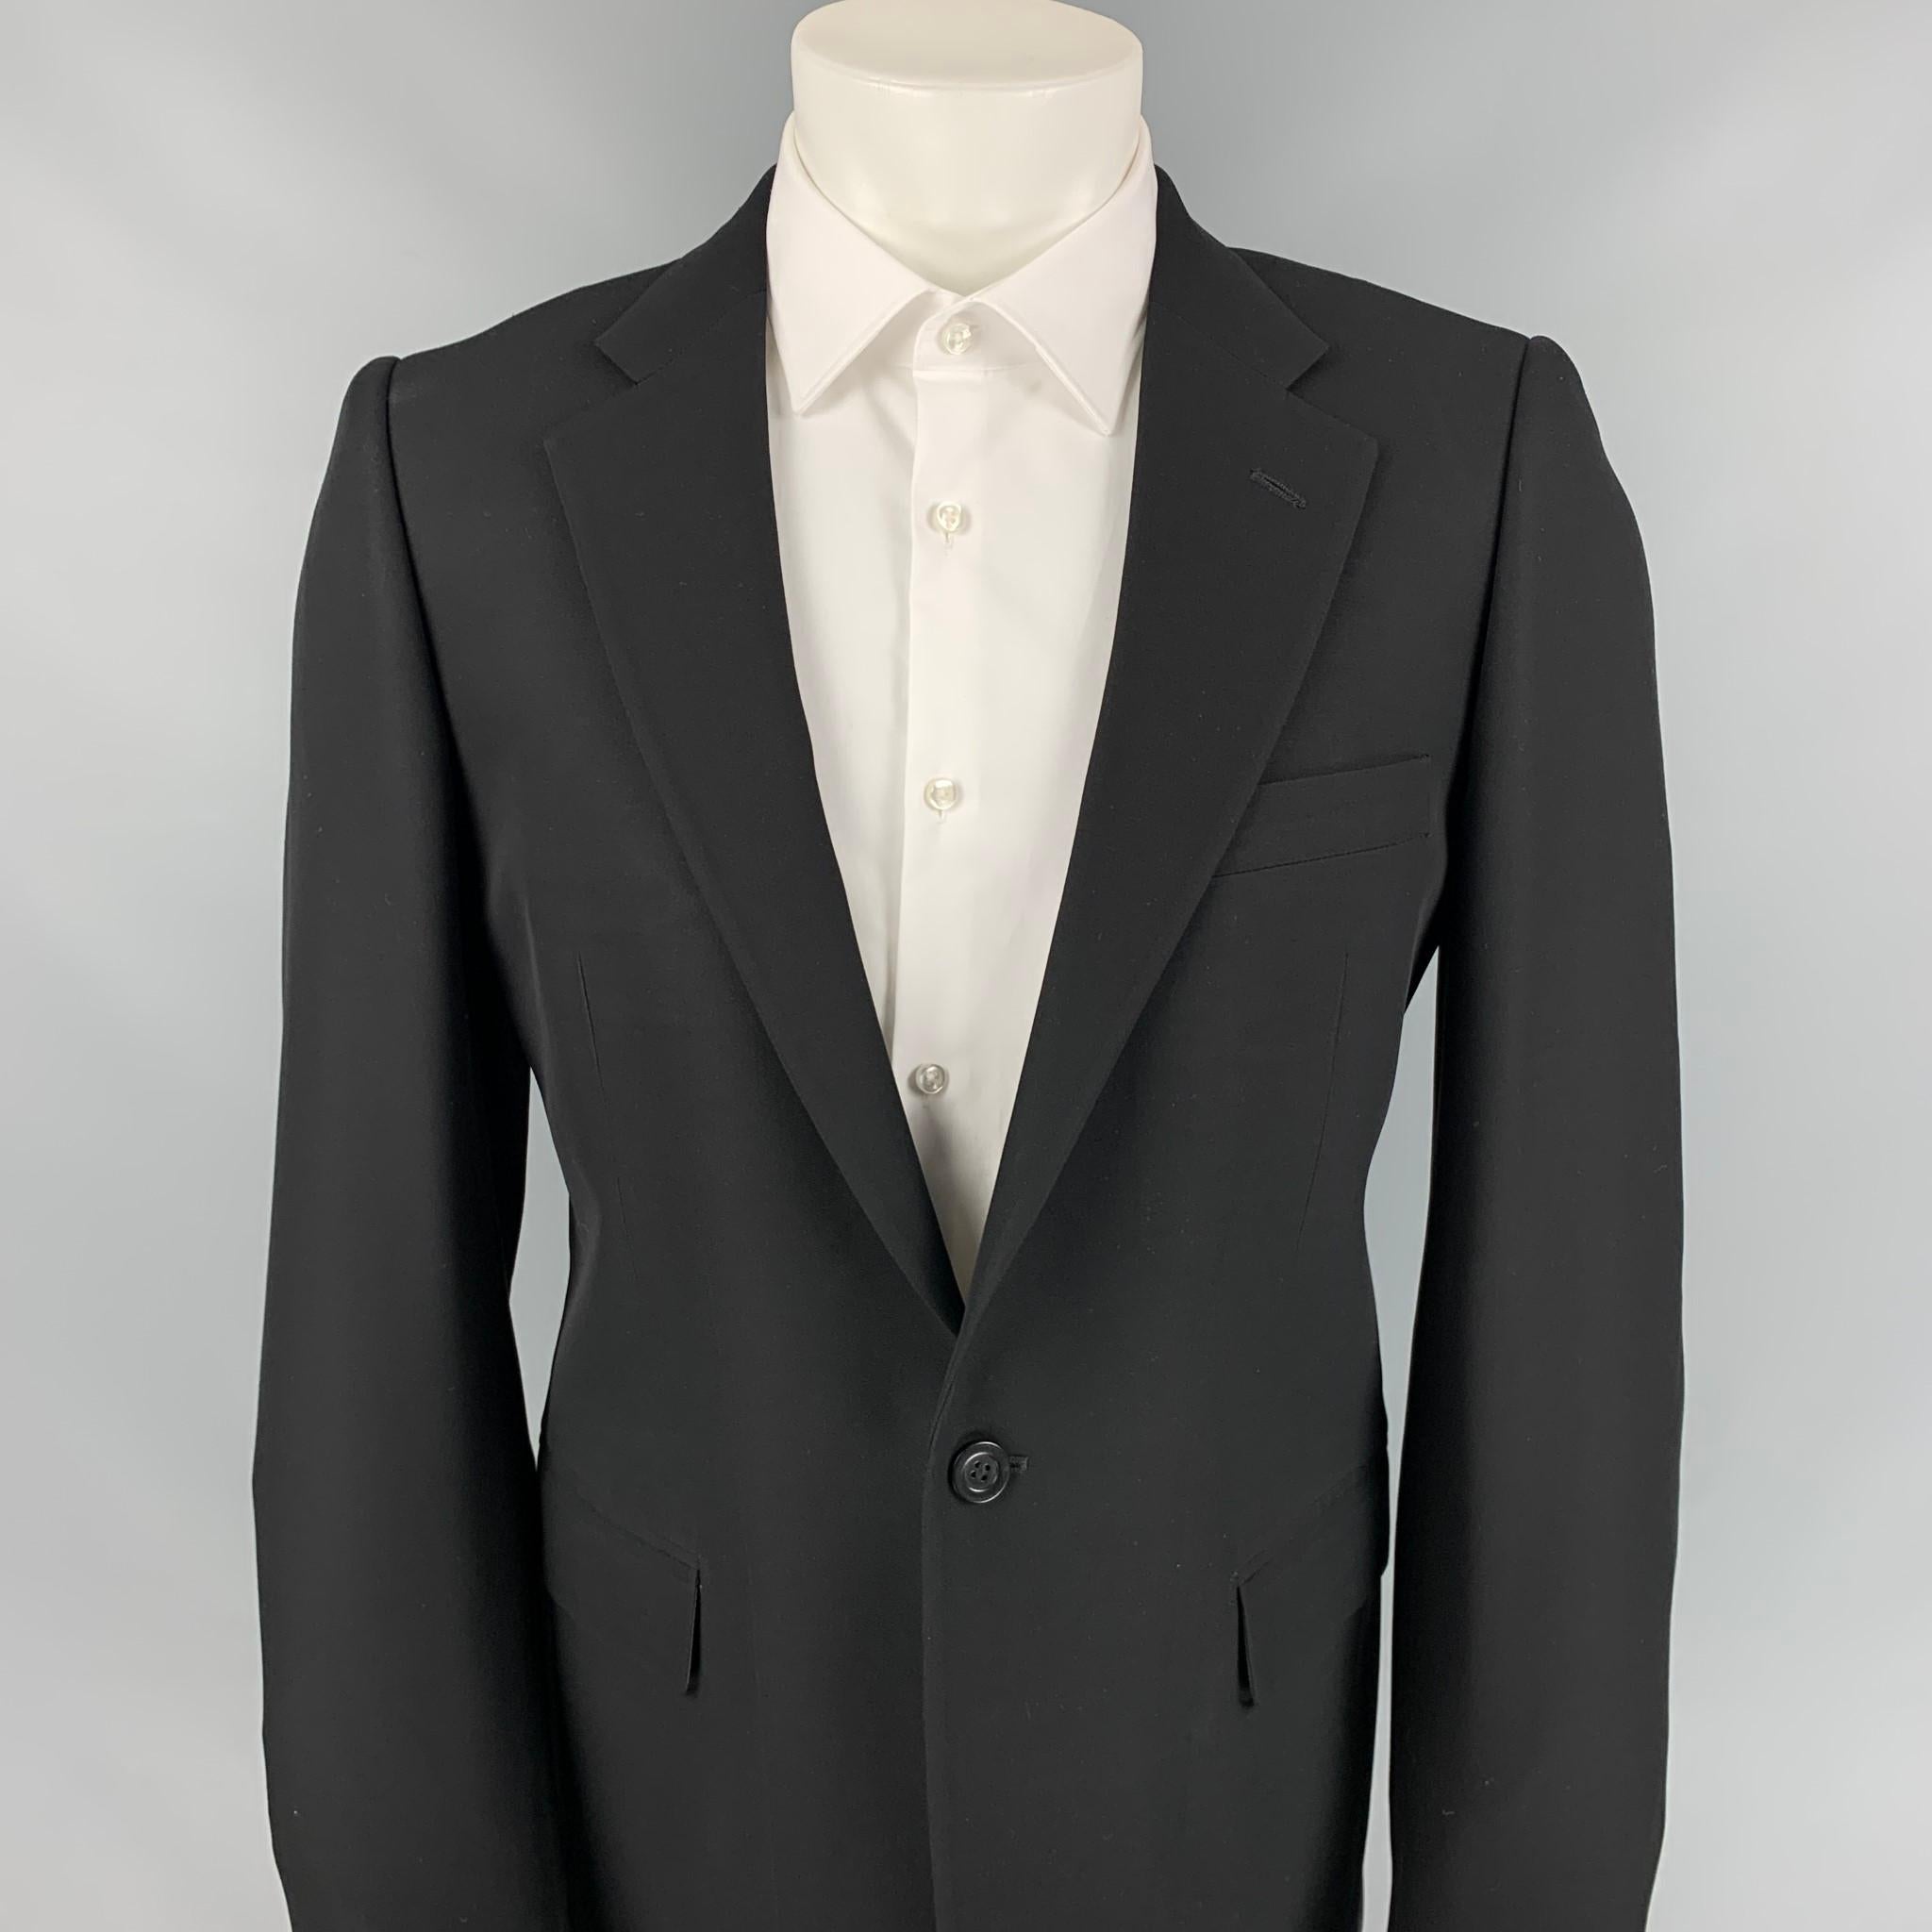 RICK OWENS x OLMAR and MIRTA sport coat comes in a wool / silk with a full liner featuring a notch lapel, flap pockets, single back vent, and a single button closure. Made in Italy. 

Very Good Pre-Owned Condition.
Marked: